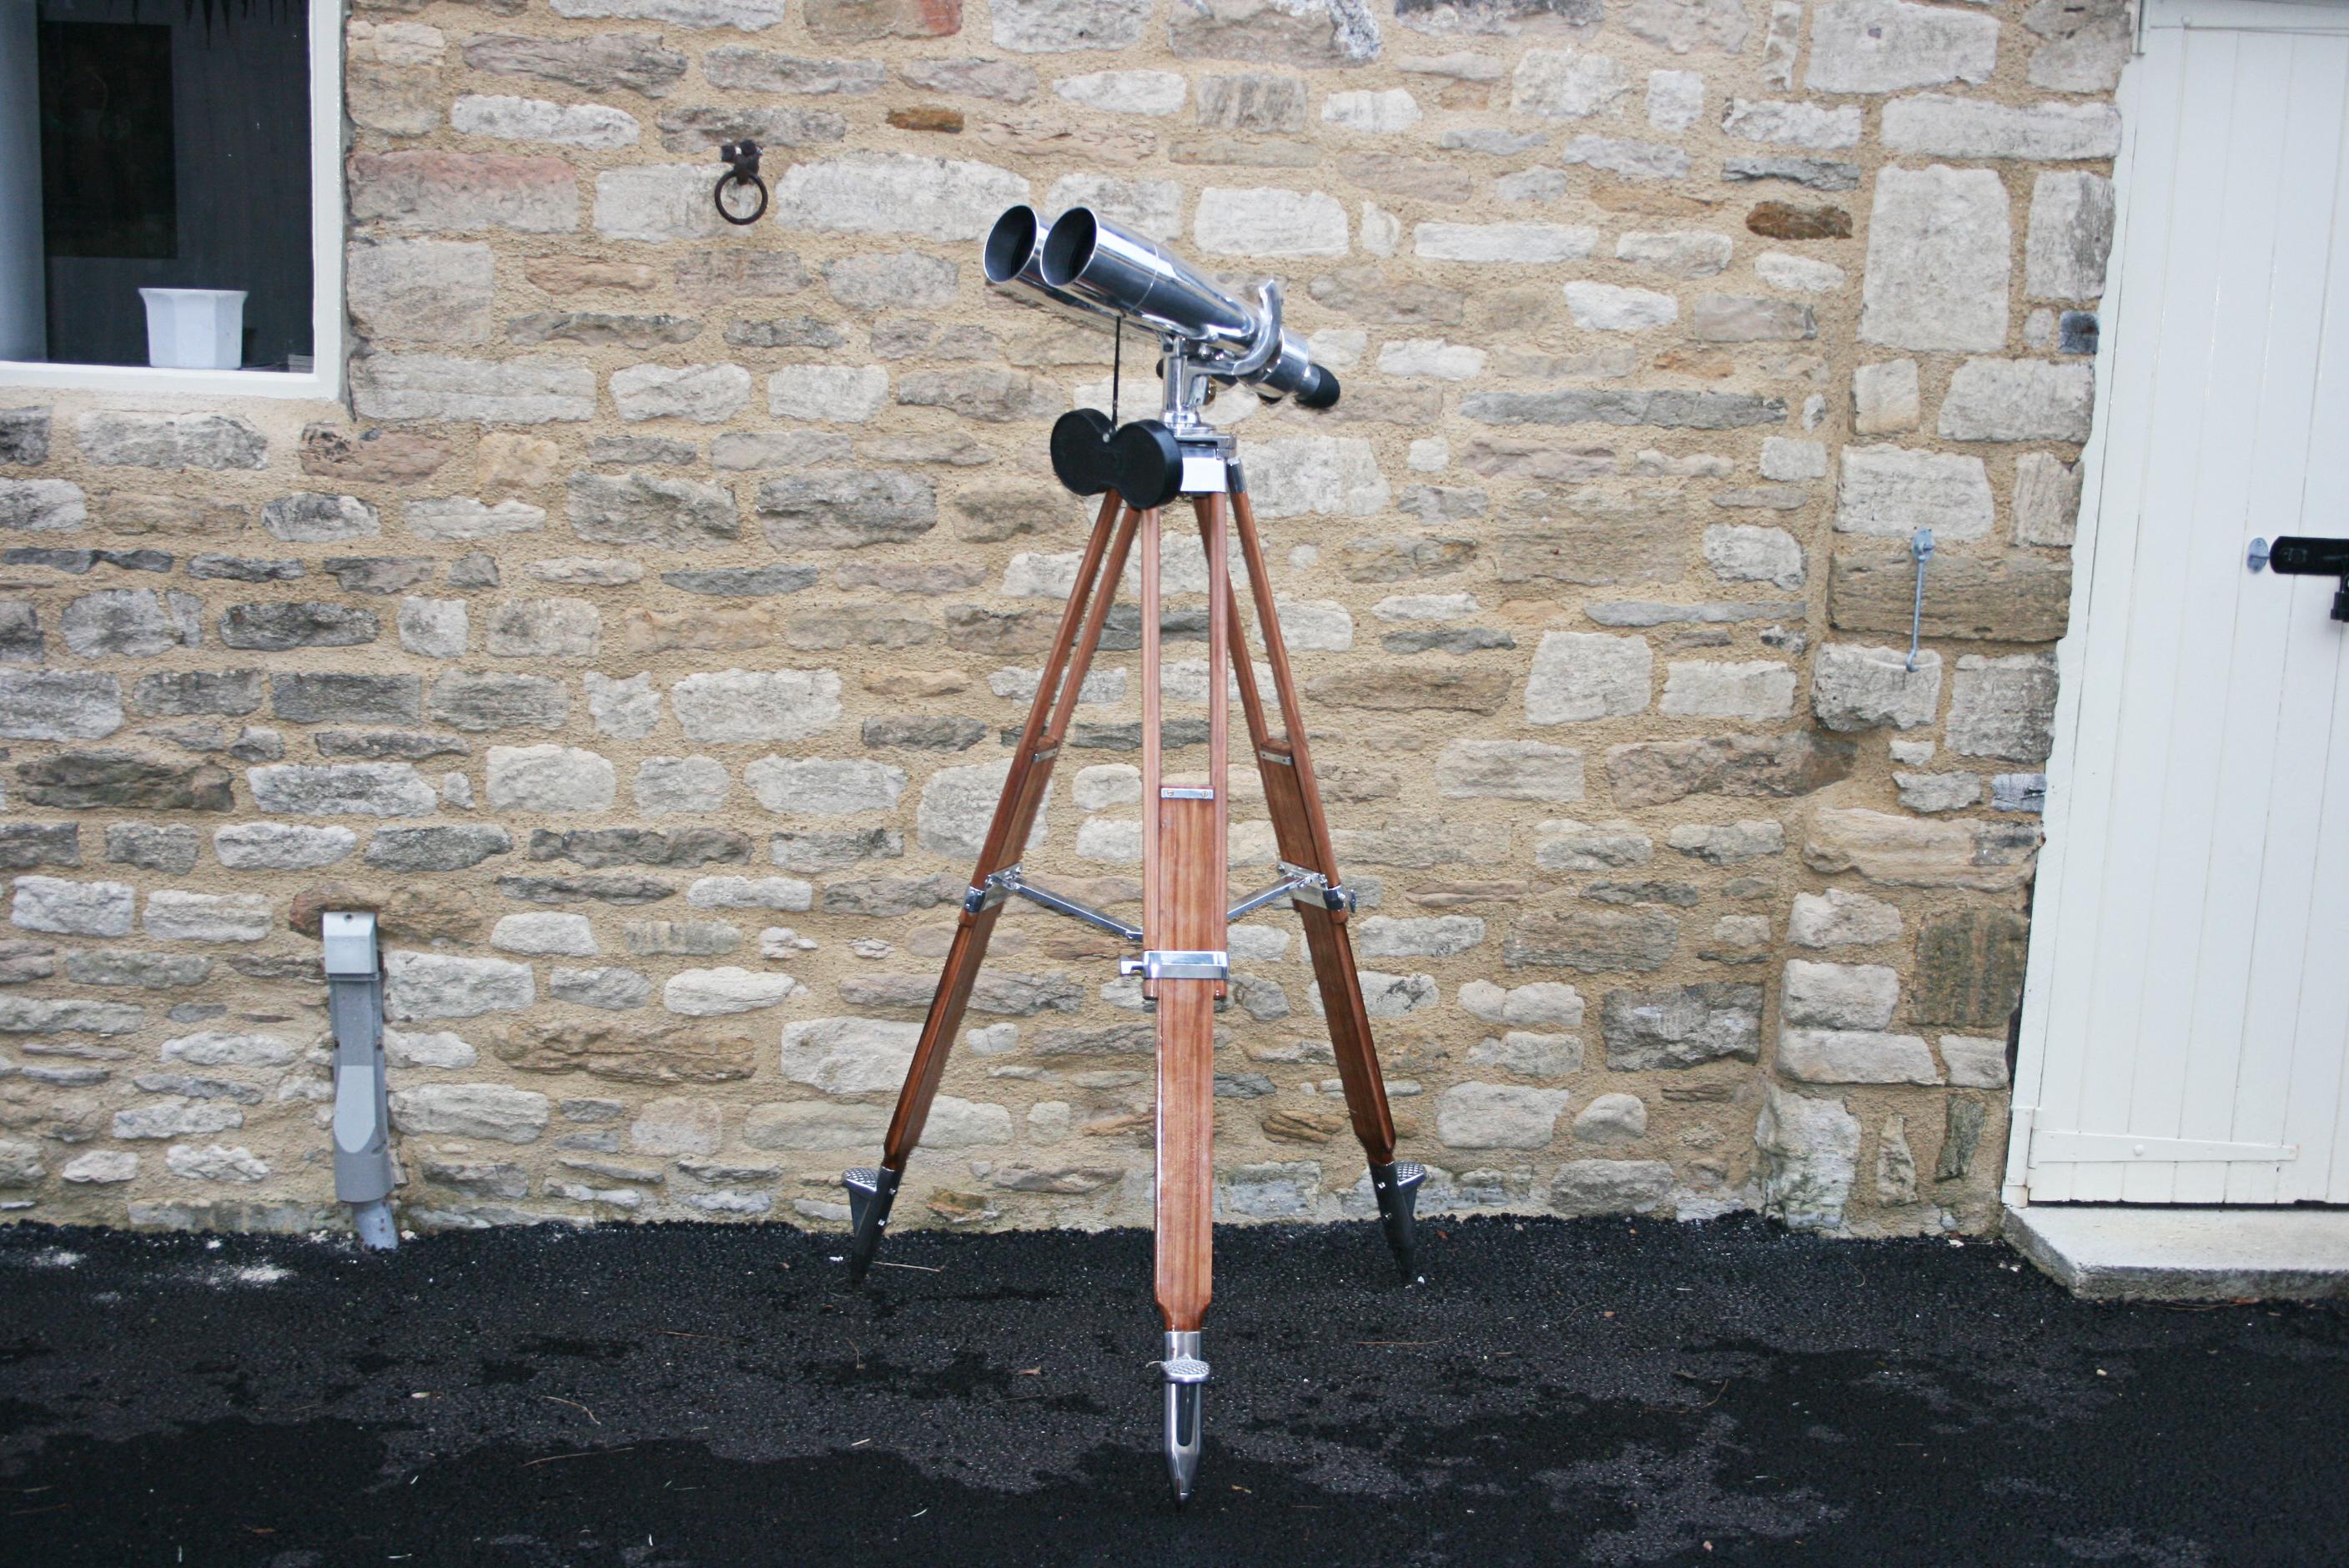 A large pair of Japanese ex-navy observation binoculars mounted on a vintage adjustable wooden tripod. The WWII marine binoculars with 4º incline eyepieces are marked 'FUJI, Meibo, -15 X 80 4º-, No. 4705, Fuji Japanese Observation Binoculars, 15 X